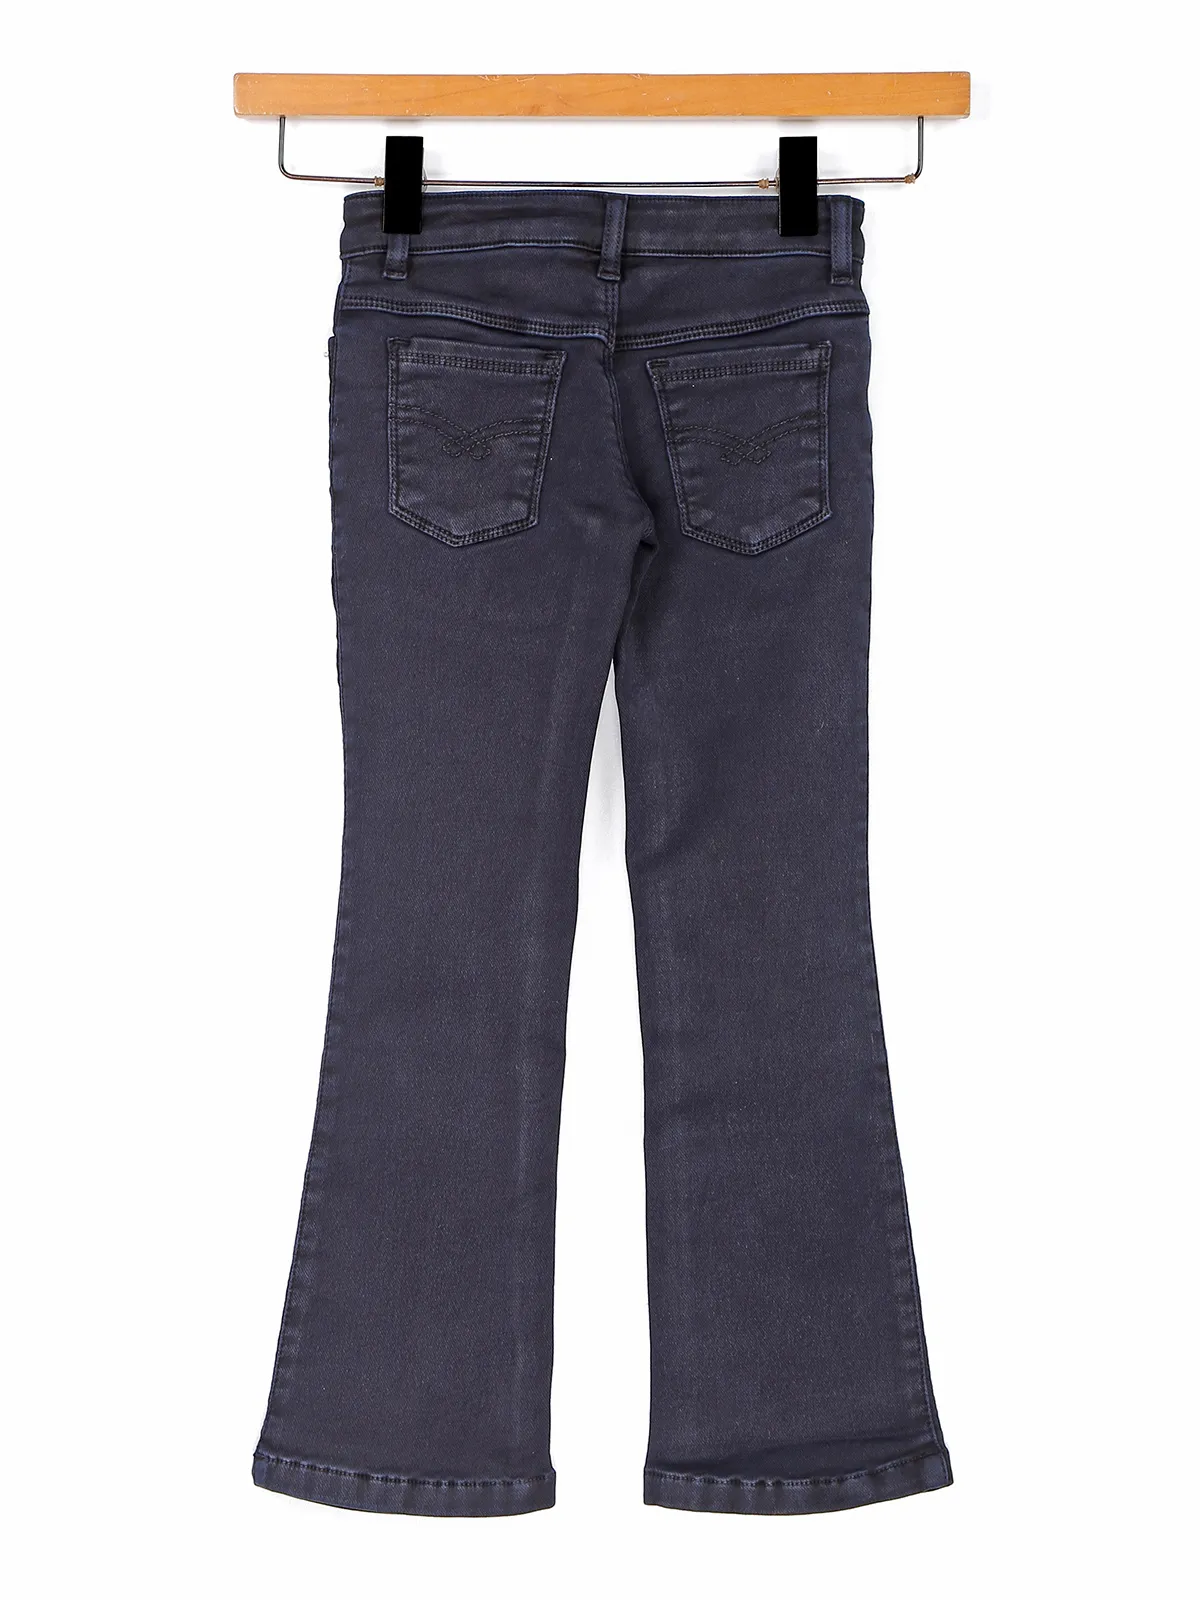 Navy solid girls jeans